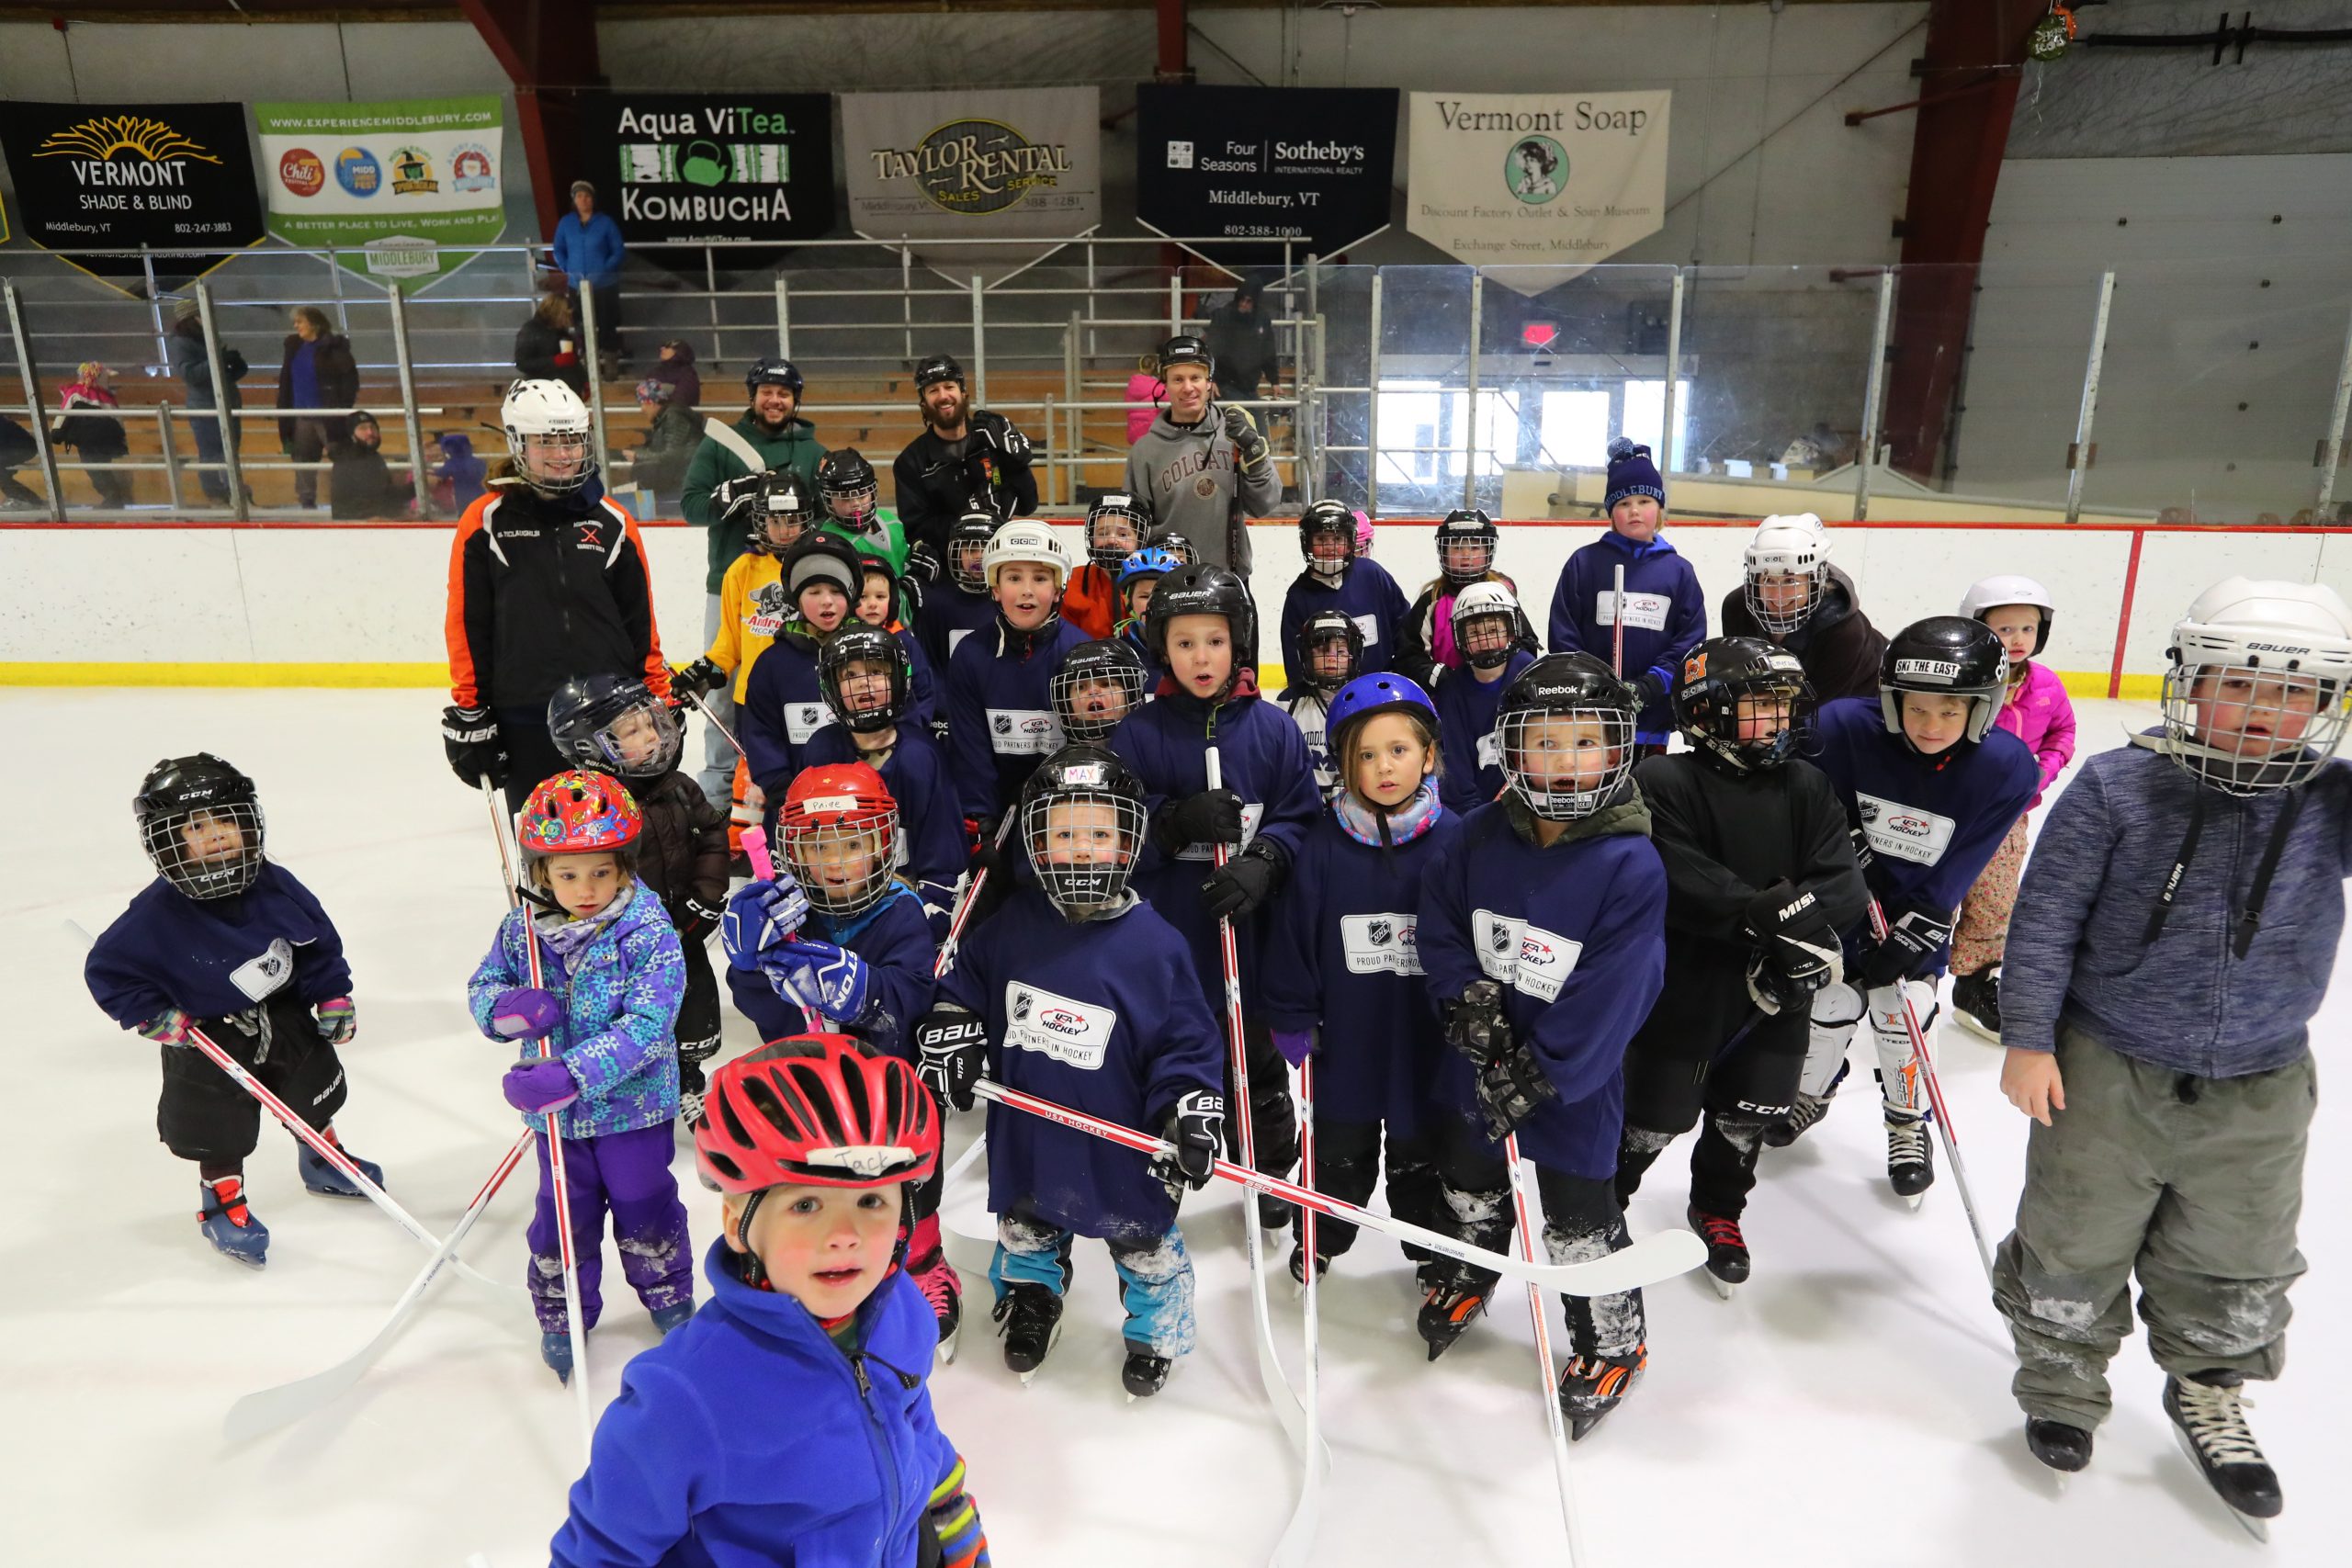 LAUGHS AND LEARNING AT TRY HOCKEY FOR FREE